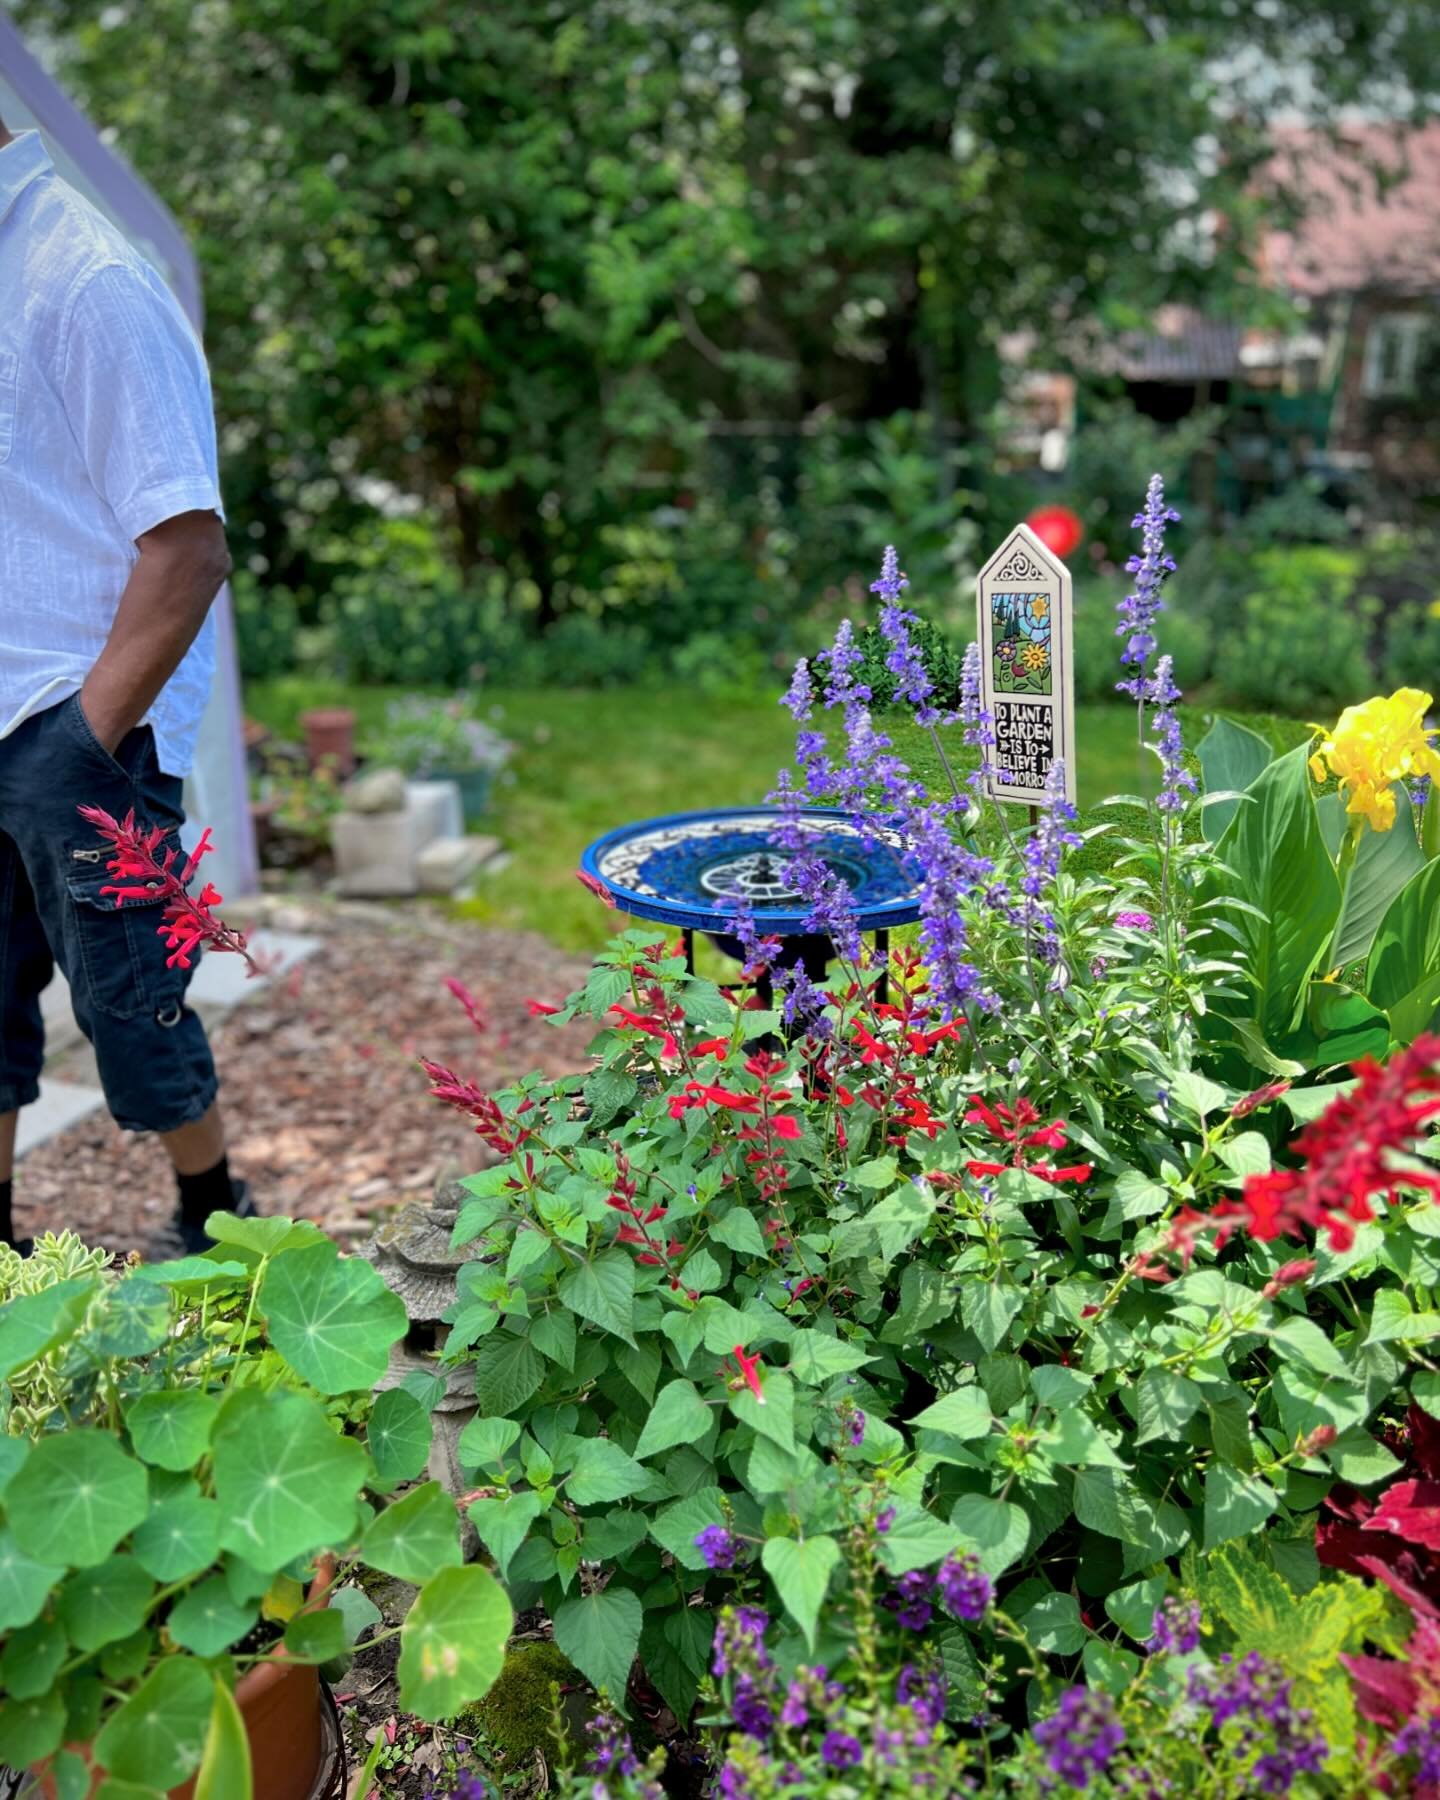 Summer is just around the corner, be part of the celebration and help us spread the word - East Side Garden Walk sign up closes in a few days, sign up at EastSideGardenWalk.com

(Photo by Jay Jinge Hu. Visitor at a garden on Campbell Rd)